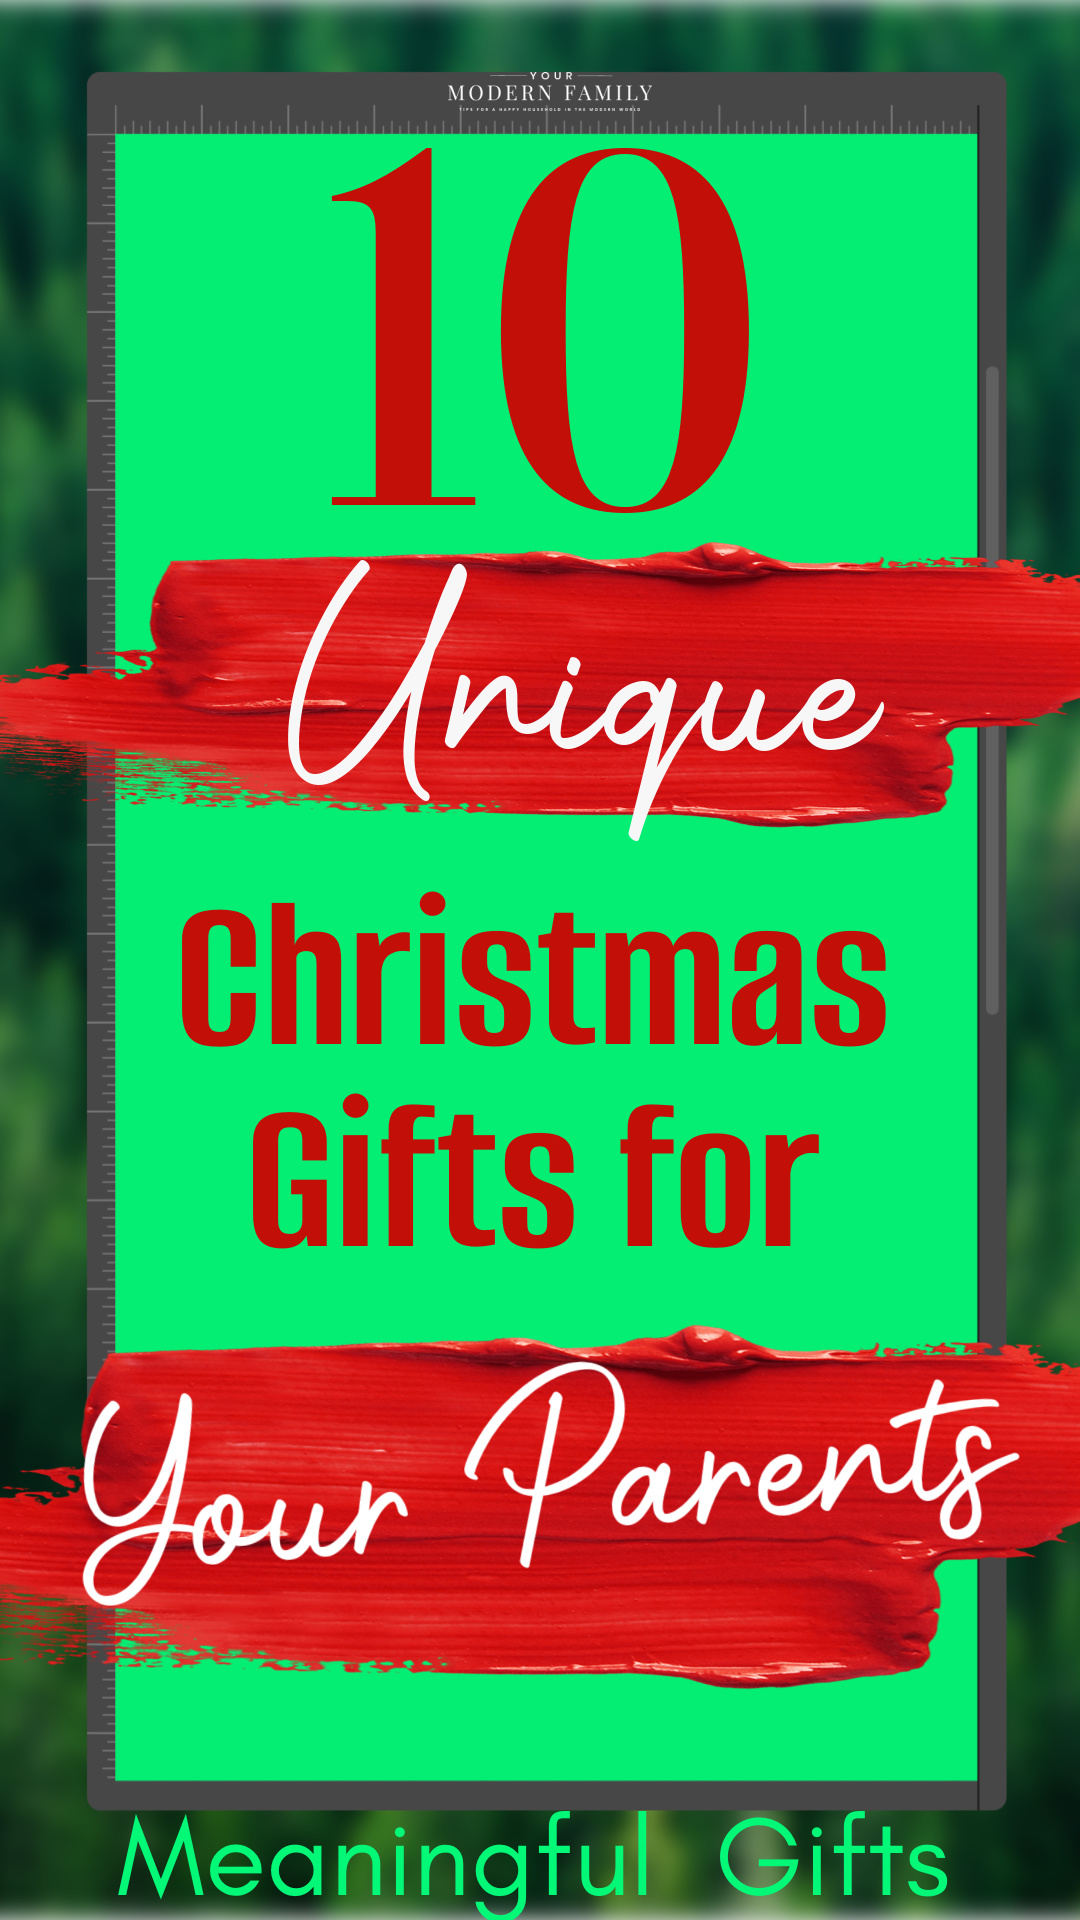 Best Christmas Gifts for Parents